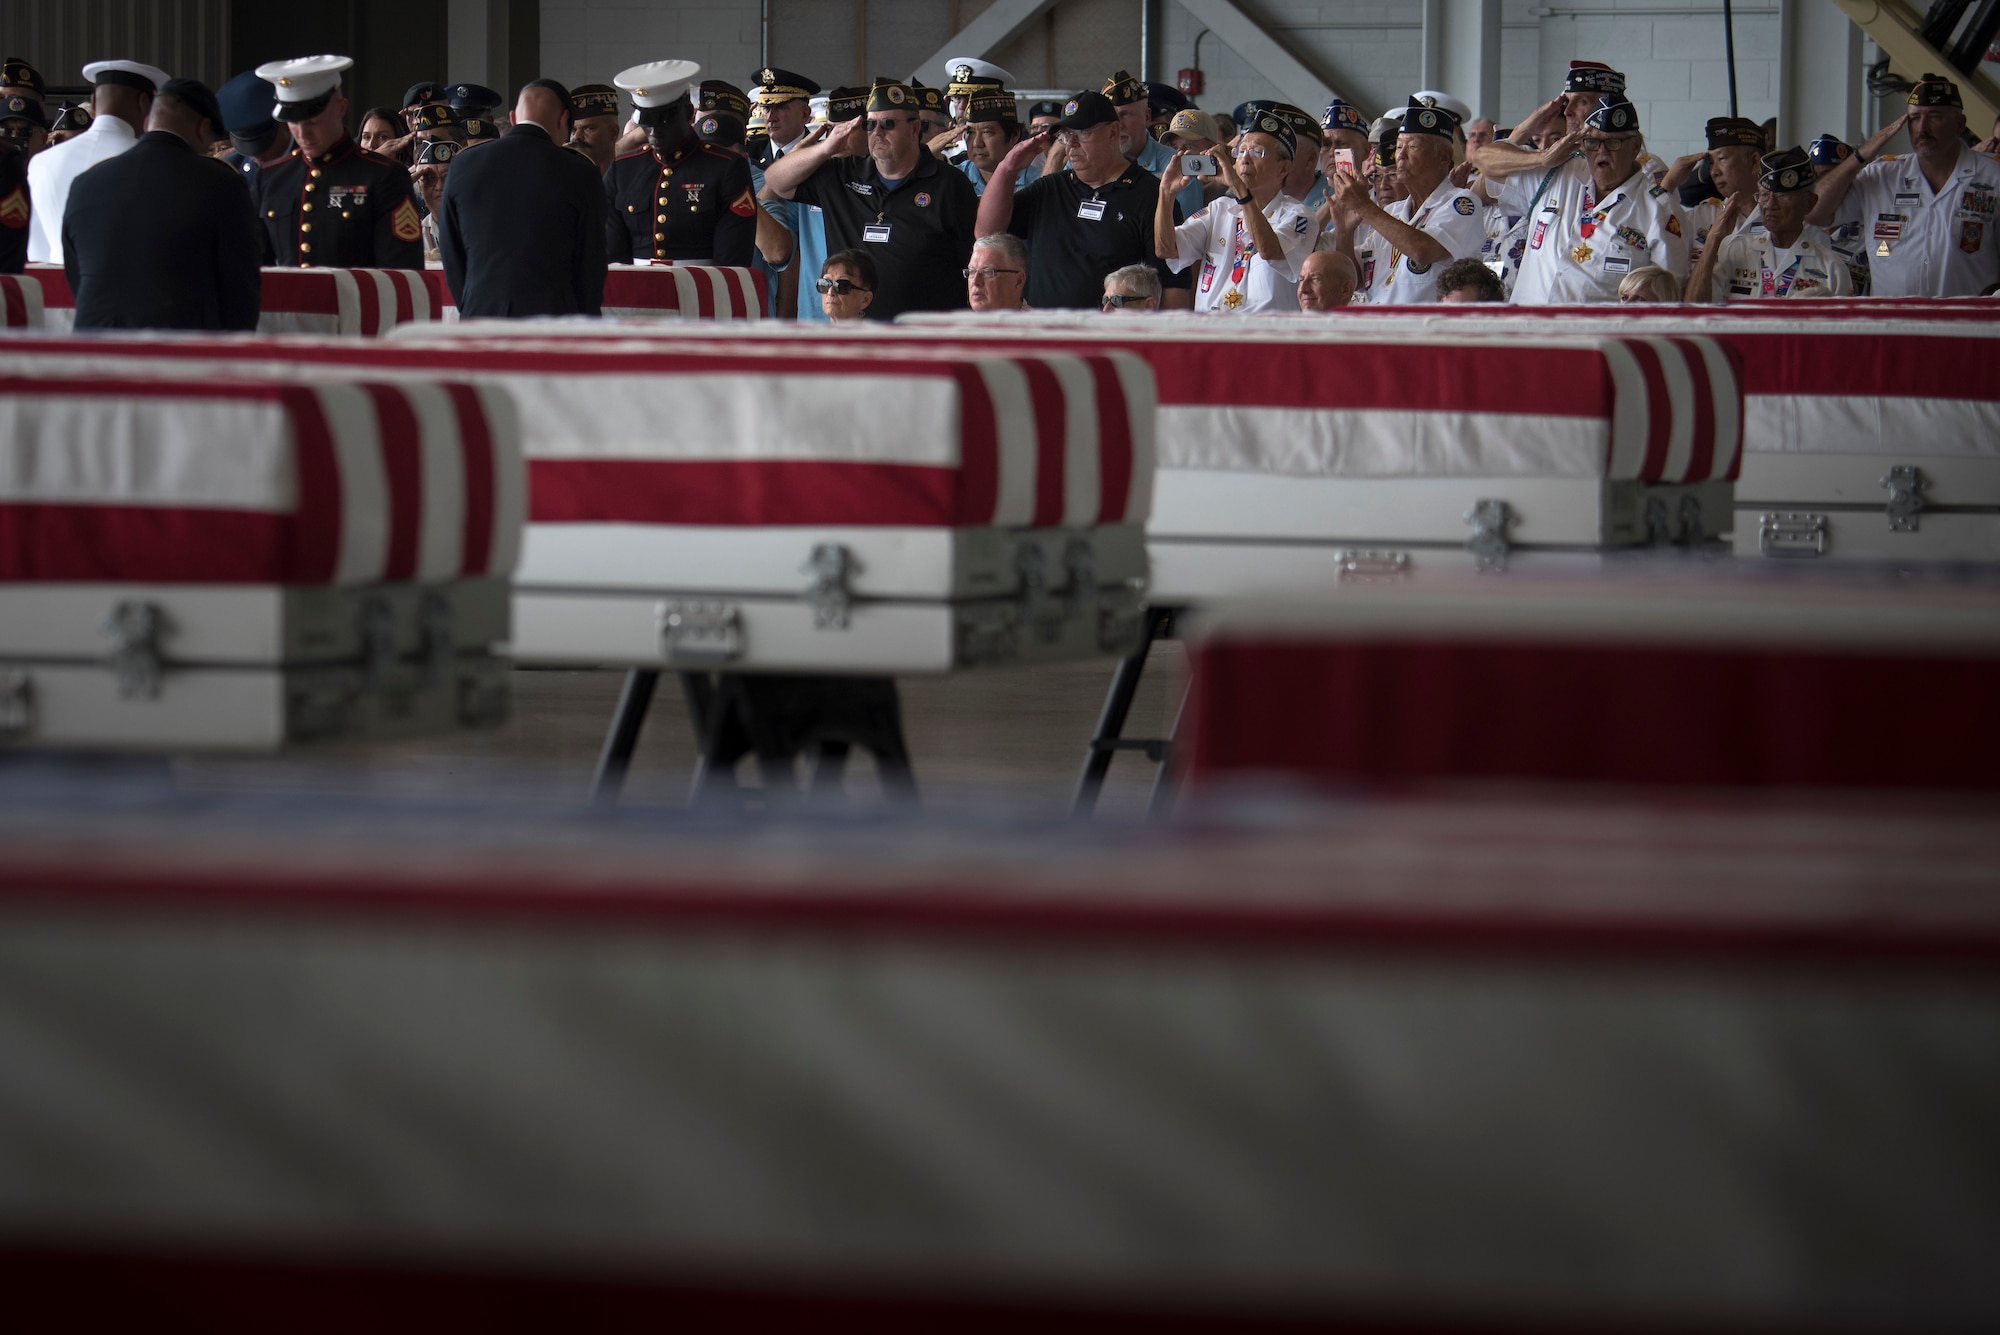 The United Nations Command recently repatriated 55 transfer cases from North Korea that contain what are believed to be the remains of American service members lost in the Korean War.